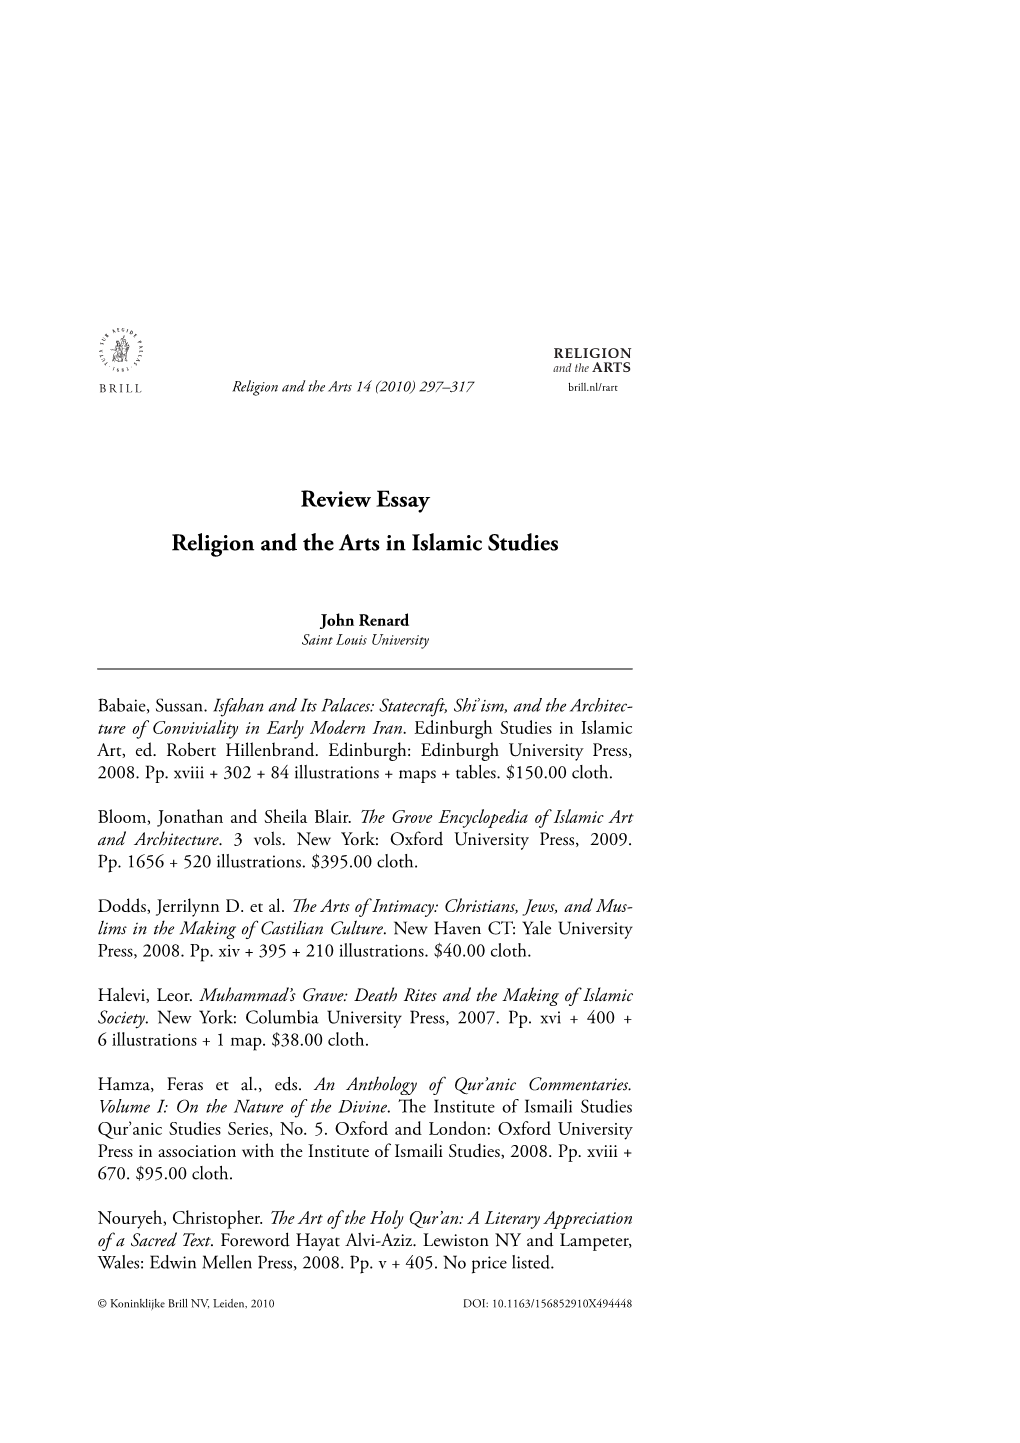 Review Essay Religion and the Arts in Islamic Studies